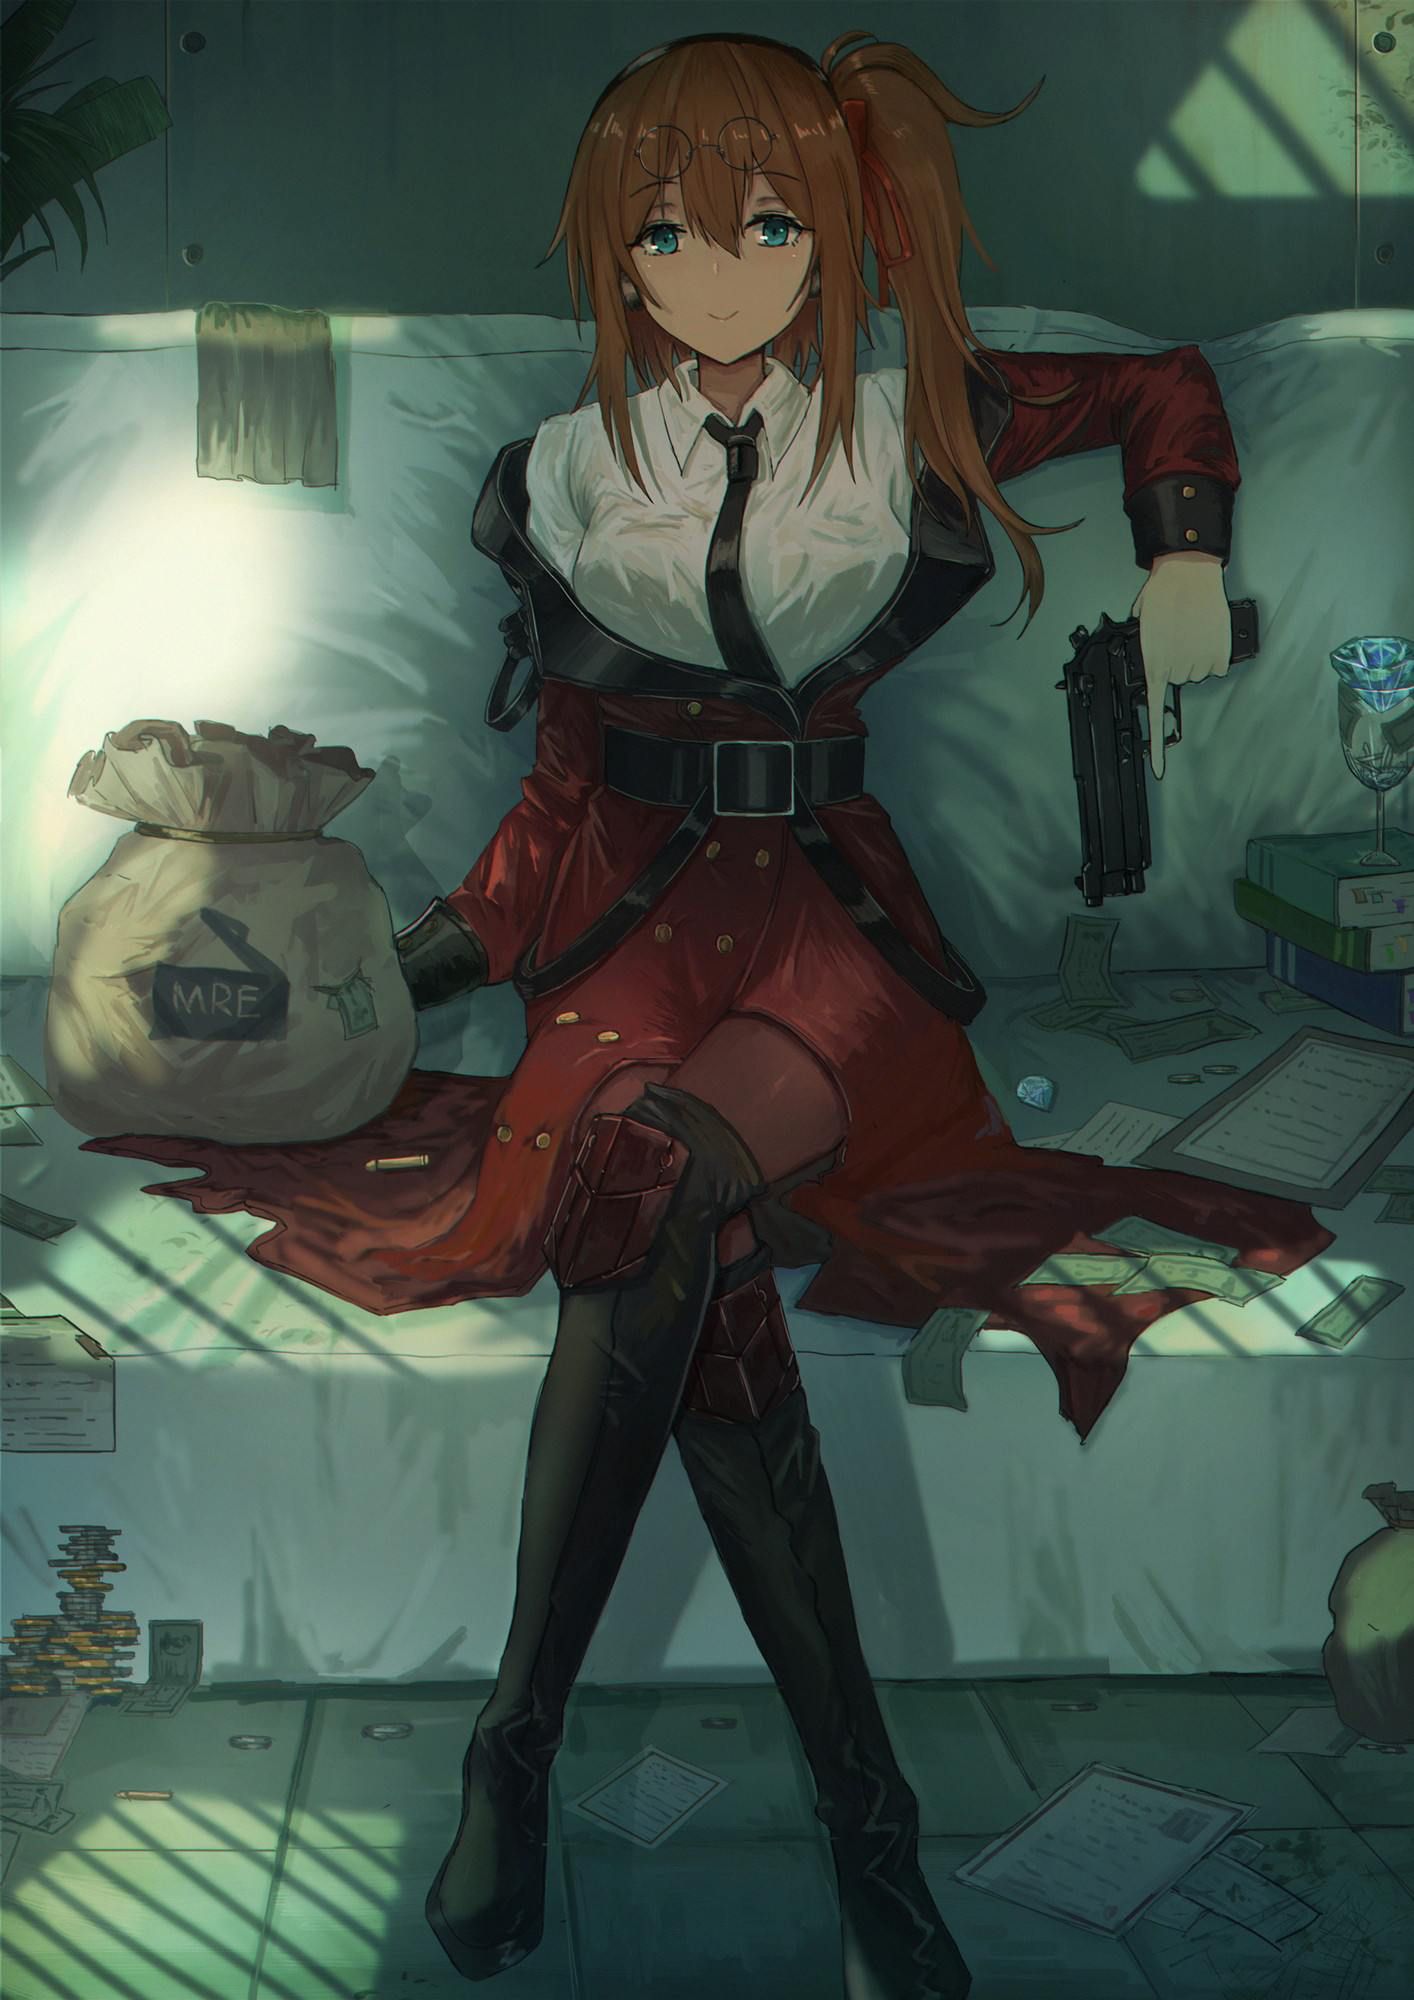 About the case that the secondary image of Dolls Frontline is too nuke and is too small 8